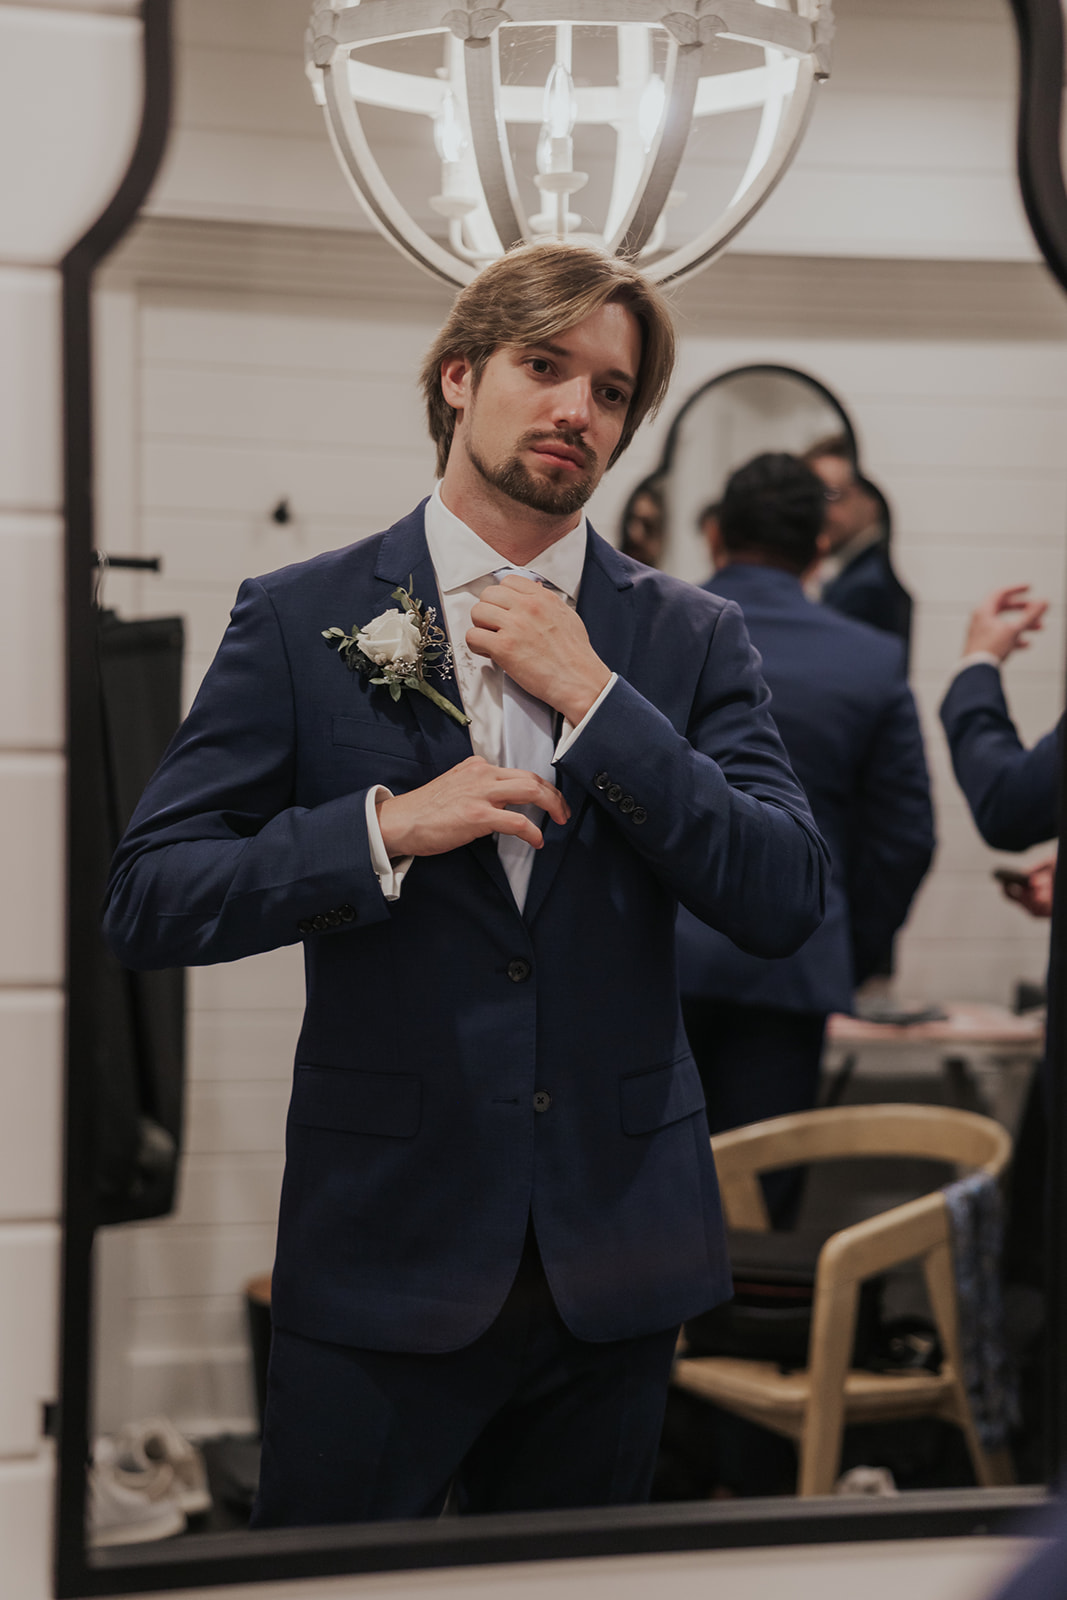 Handsome groom adds his final touches as he prepares for his dreamy Georgia wedding